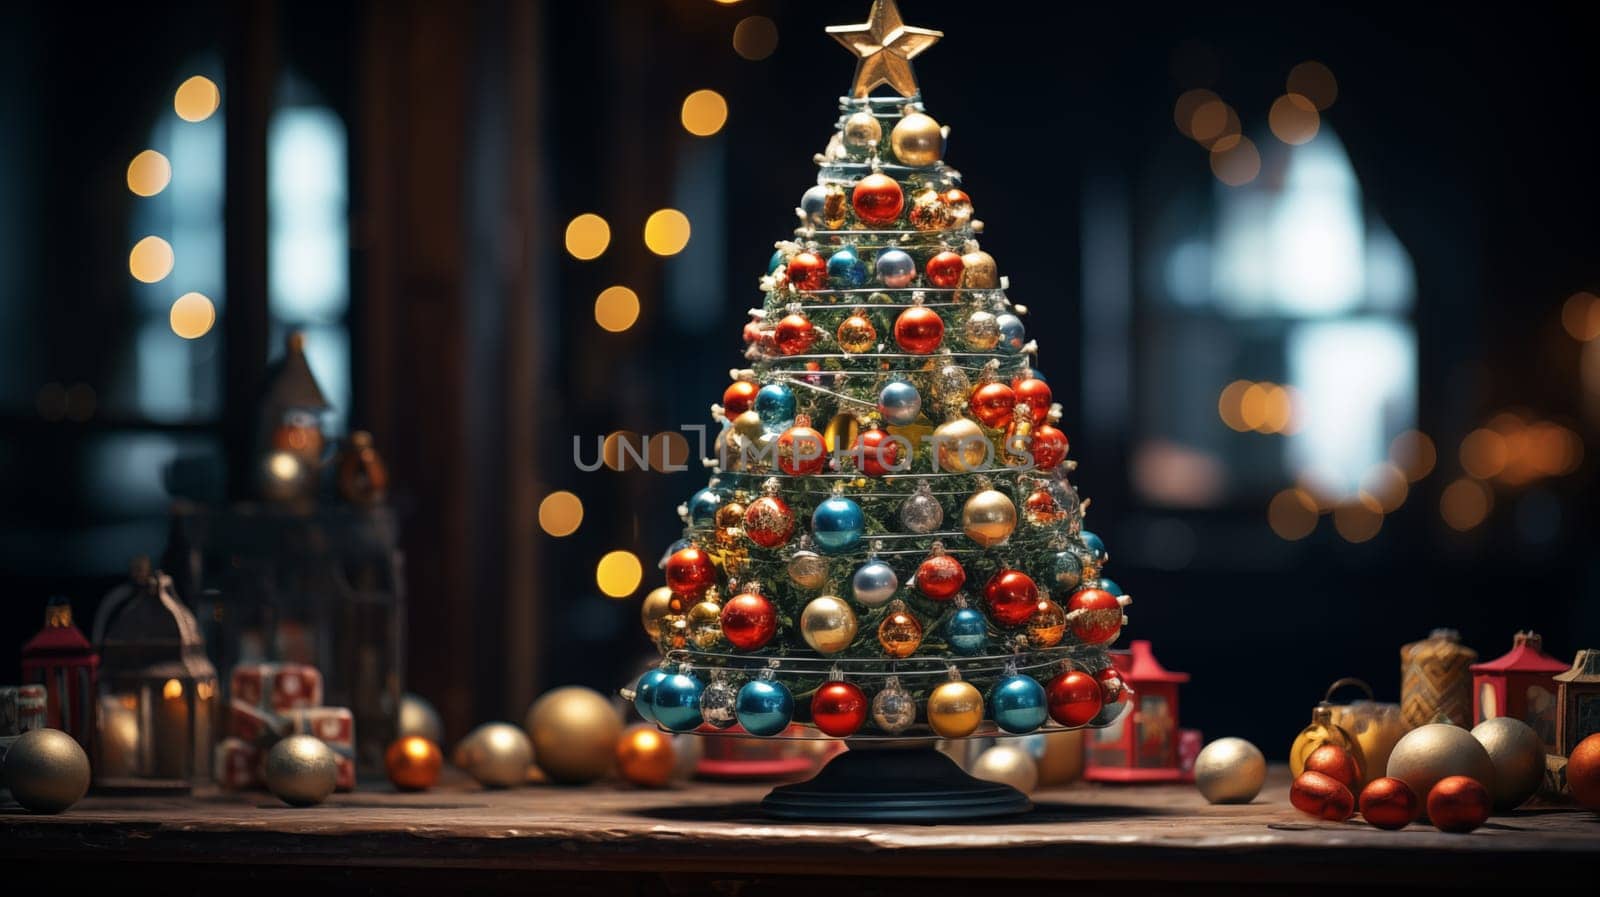 A beautiful little Christmas tree stands on wooden table in dark room